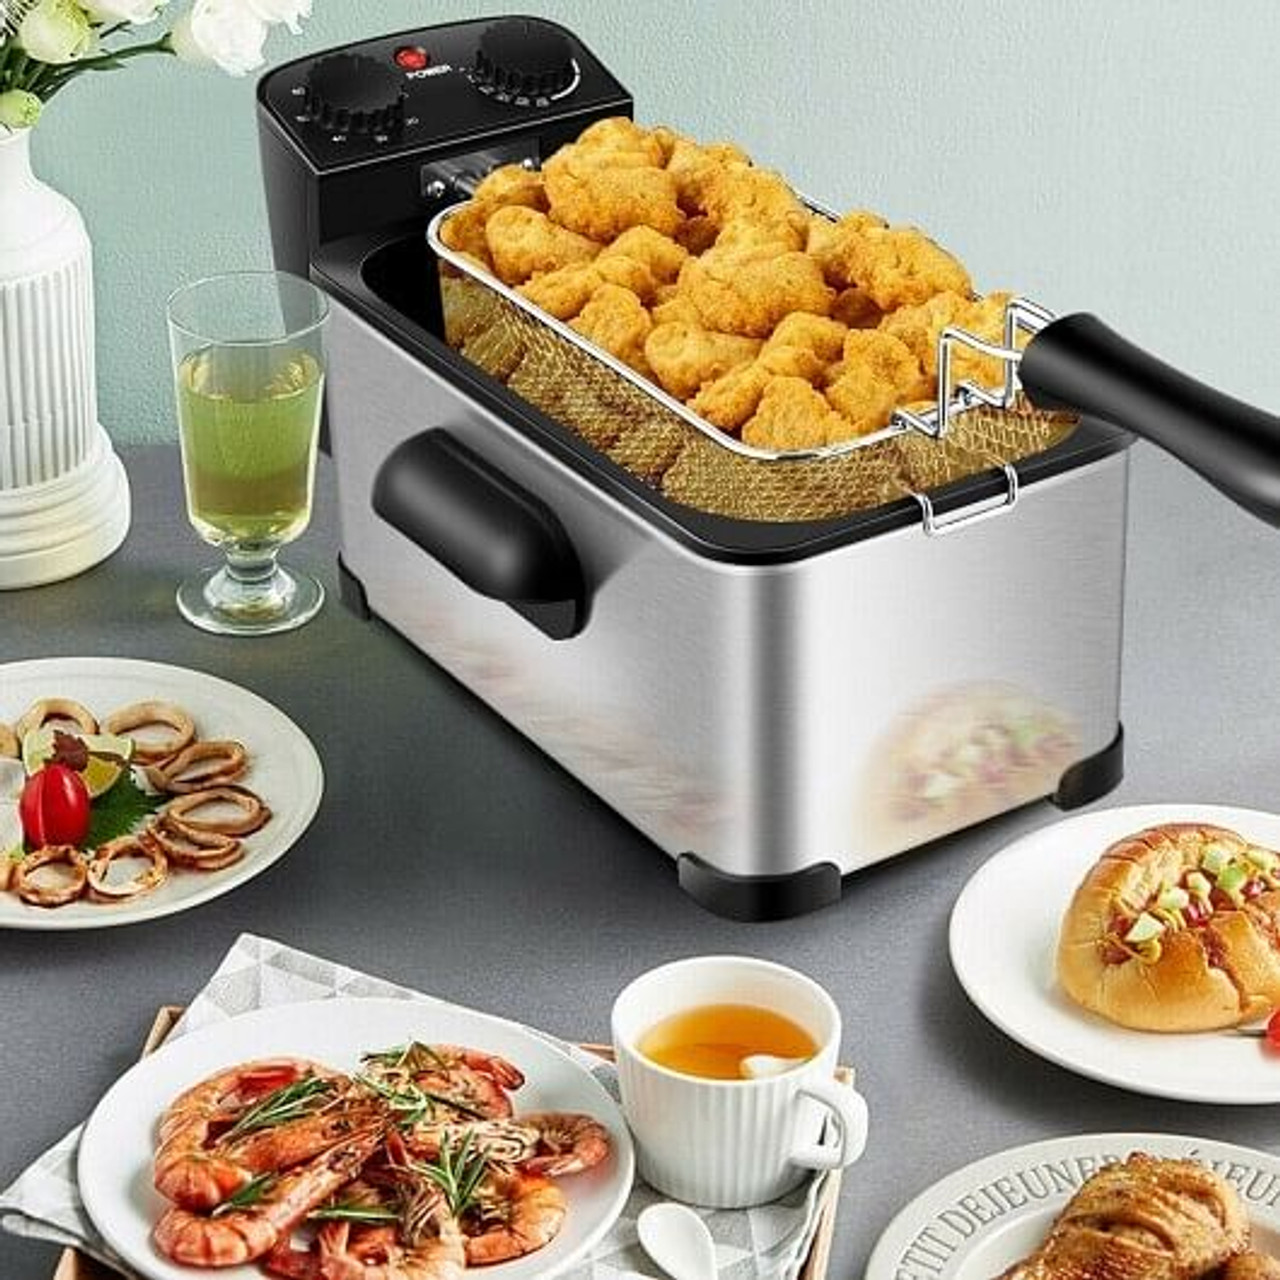 3.2 Quart Electric Stainless Steel Deep Fryer w/ Timer